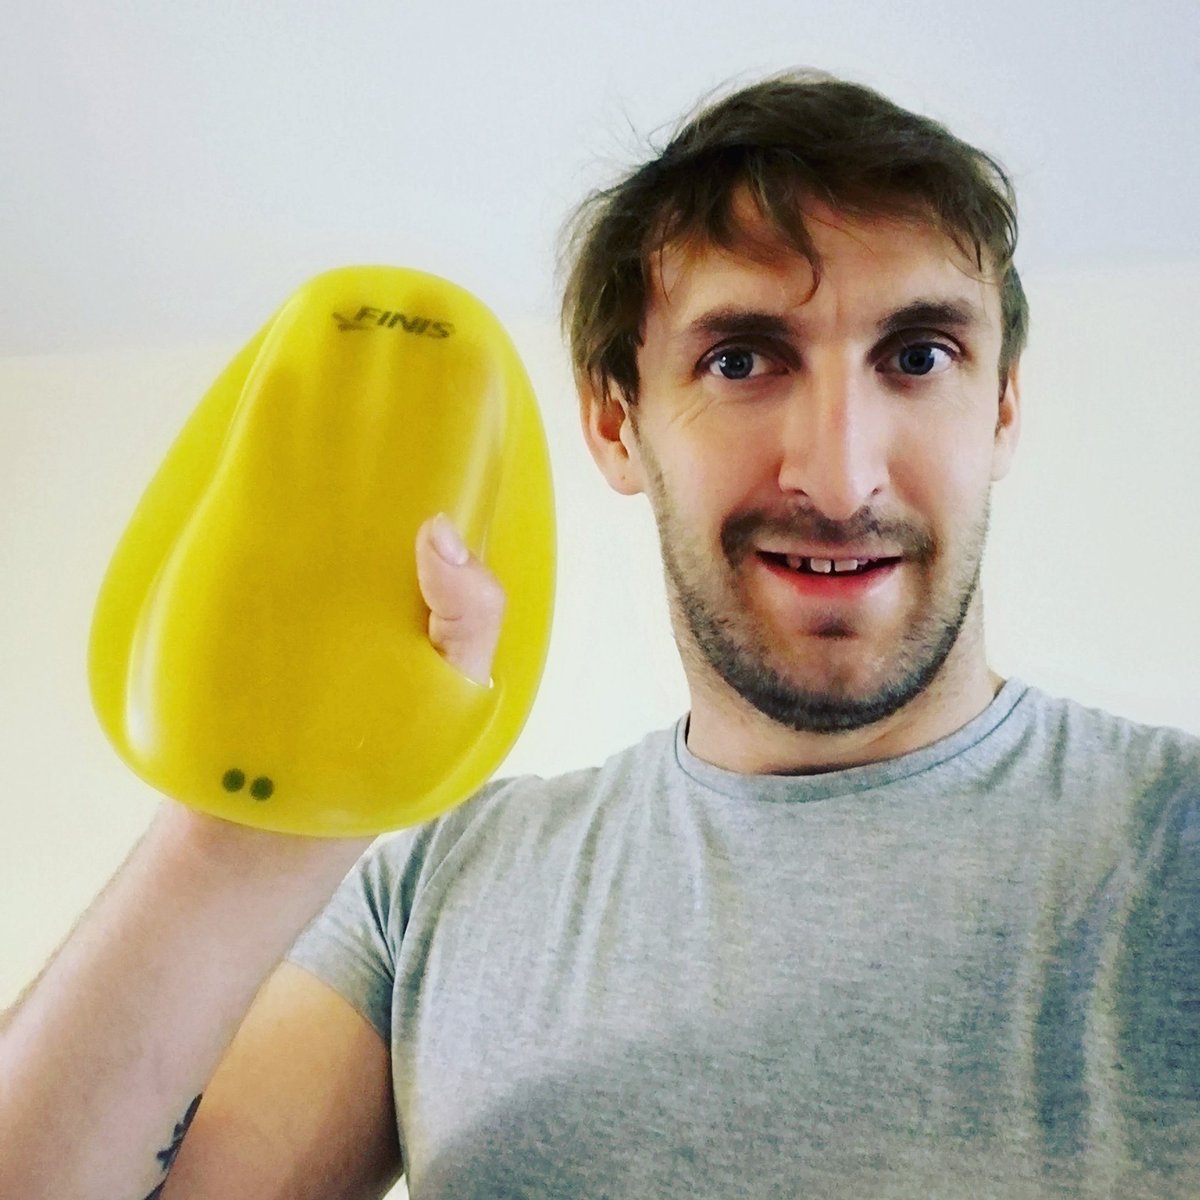 These early morning swim training is tiring but definitely worth the benefits. I tried out my new agility paddles and they're great! Just a shame my swim hat broke 😭🏊‍♂️🏊‍♀️ #swimming #phdlife #swimfit #swimstory